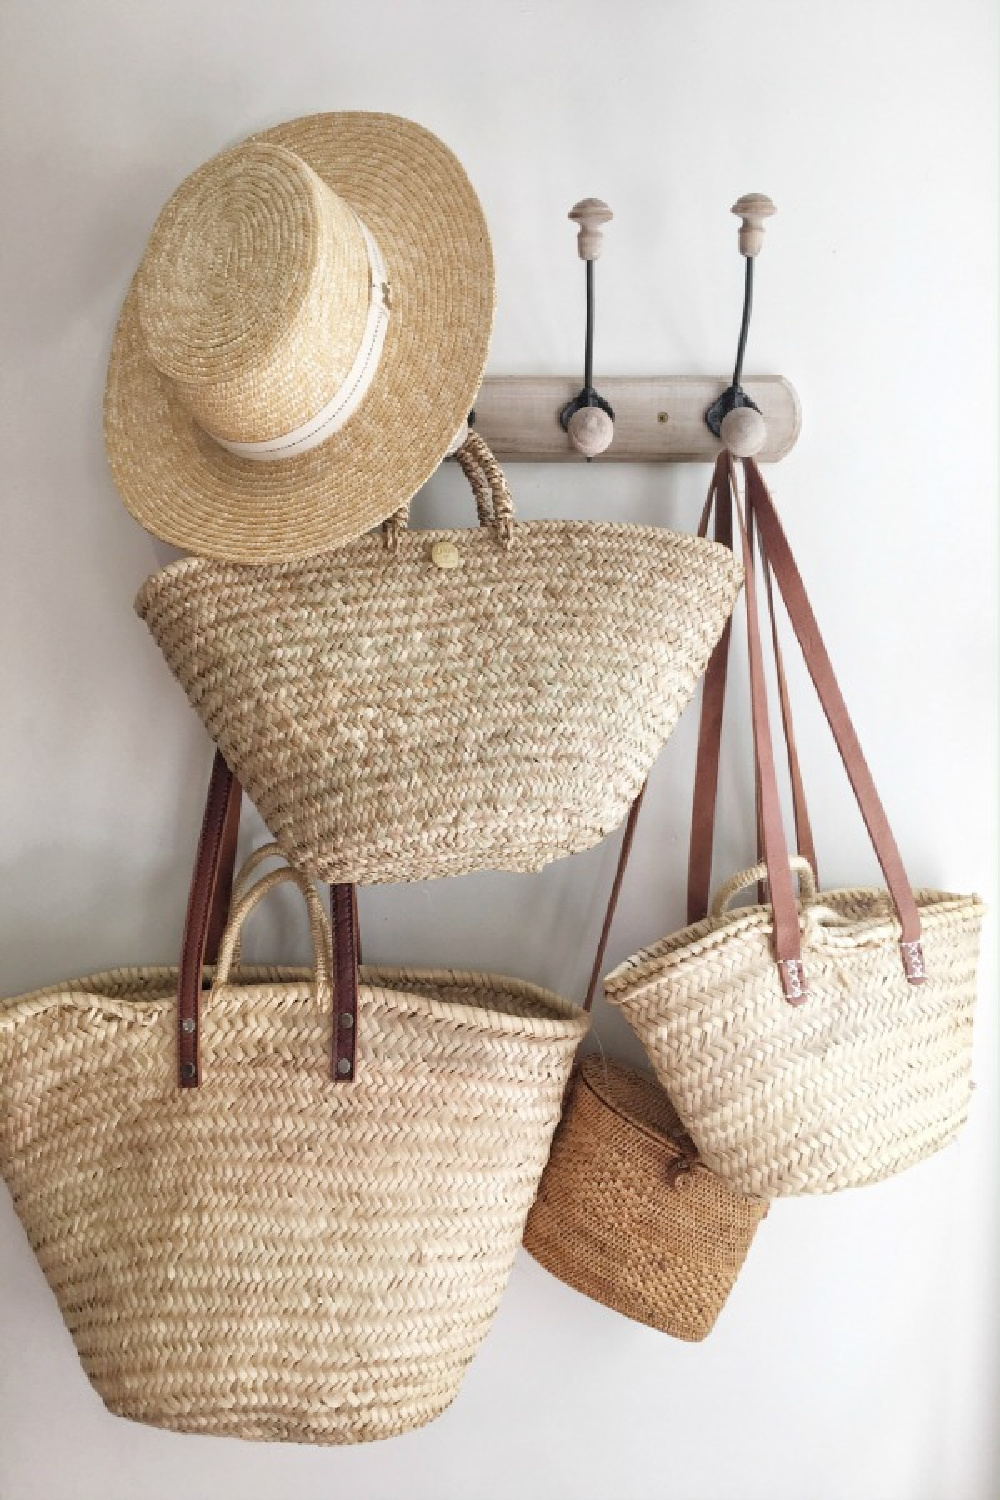 Charming French market baskets from Vivi et Margot hang from a hook in a French farmhouse. #vivietmargot #frenchmakret #frenchbaskets #marketbaskets #summerliving #rusticdecor #frenchcountry